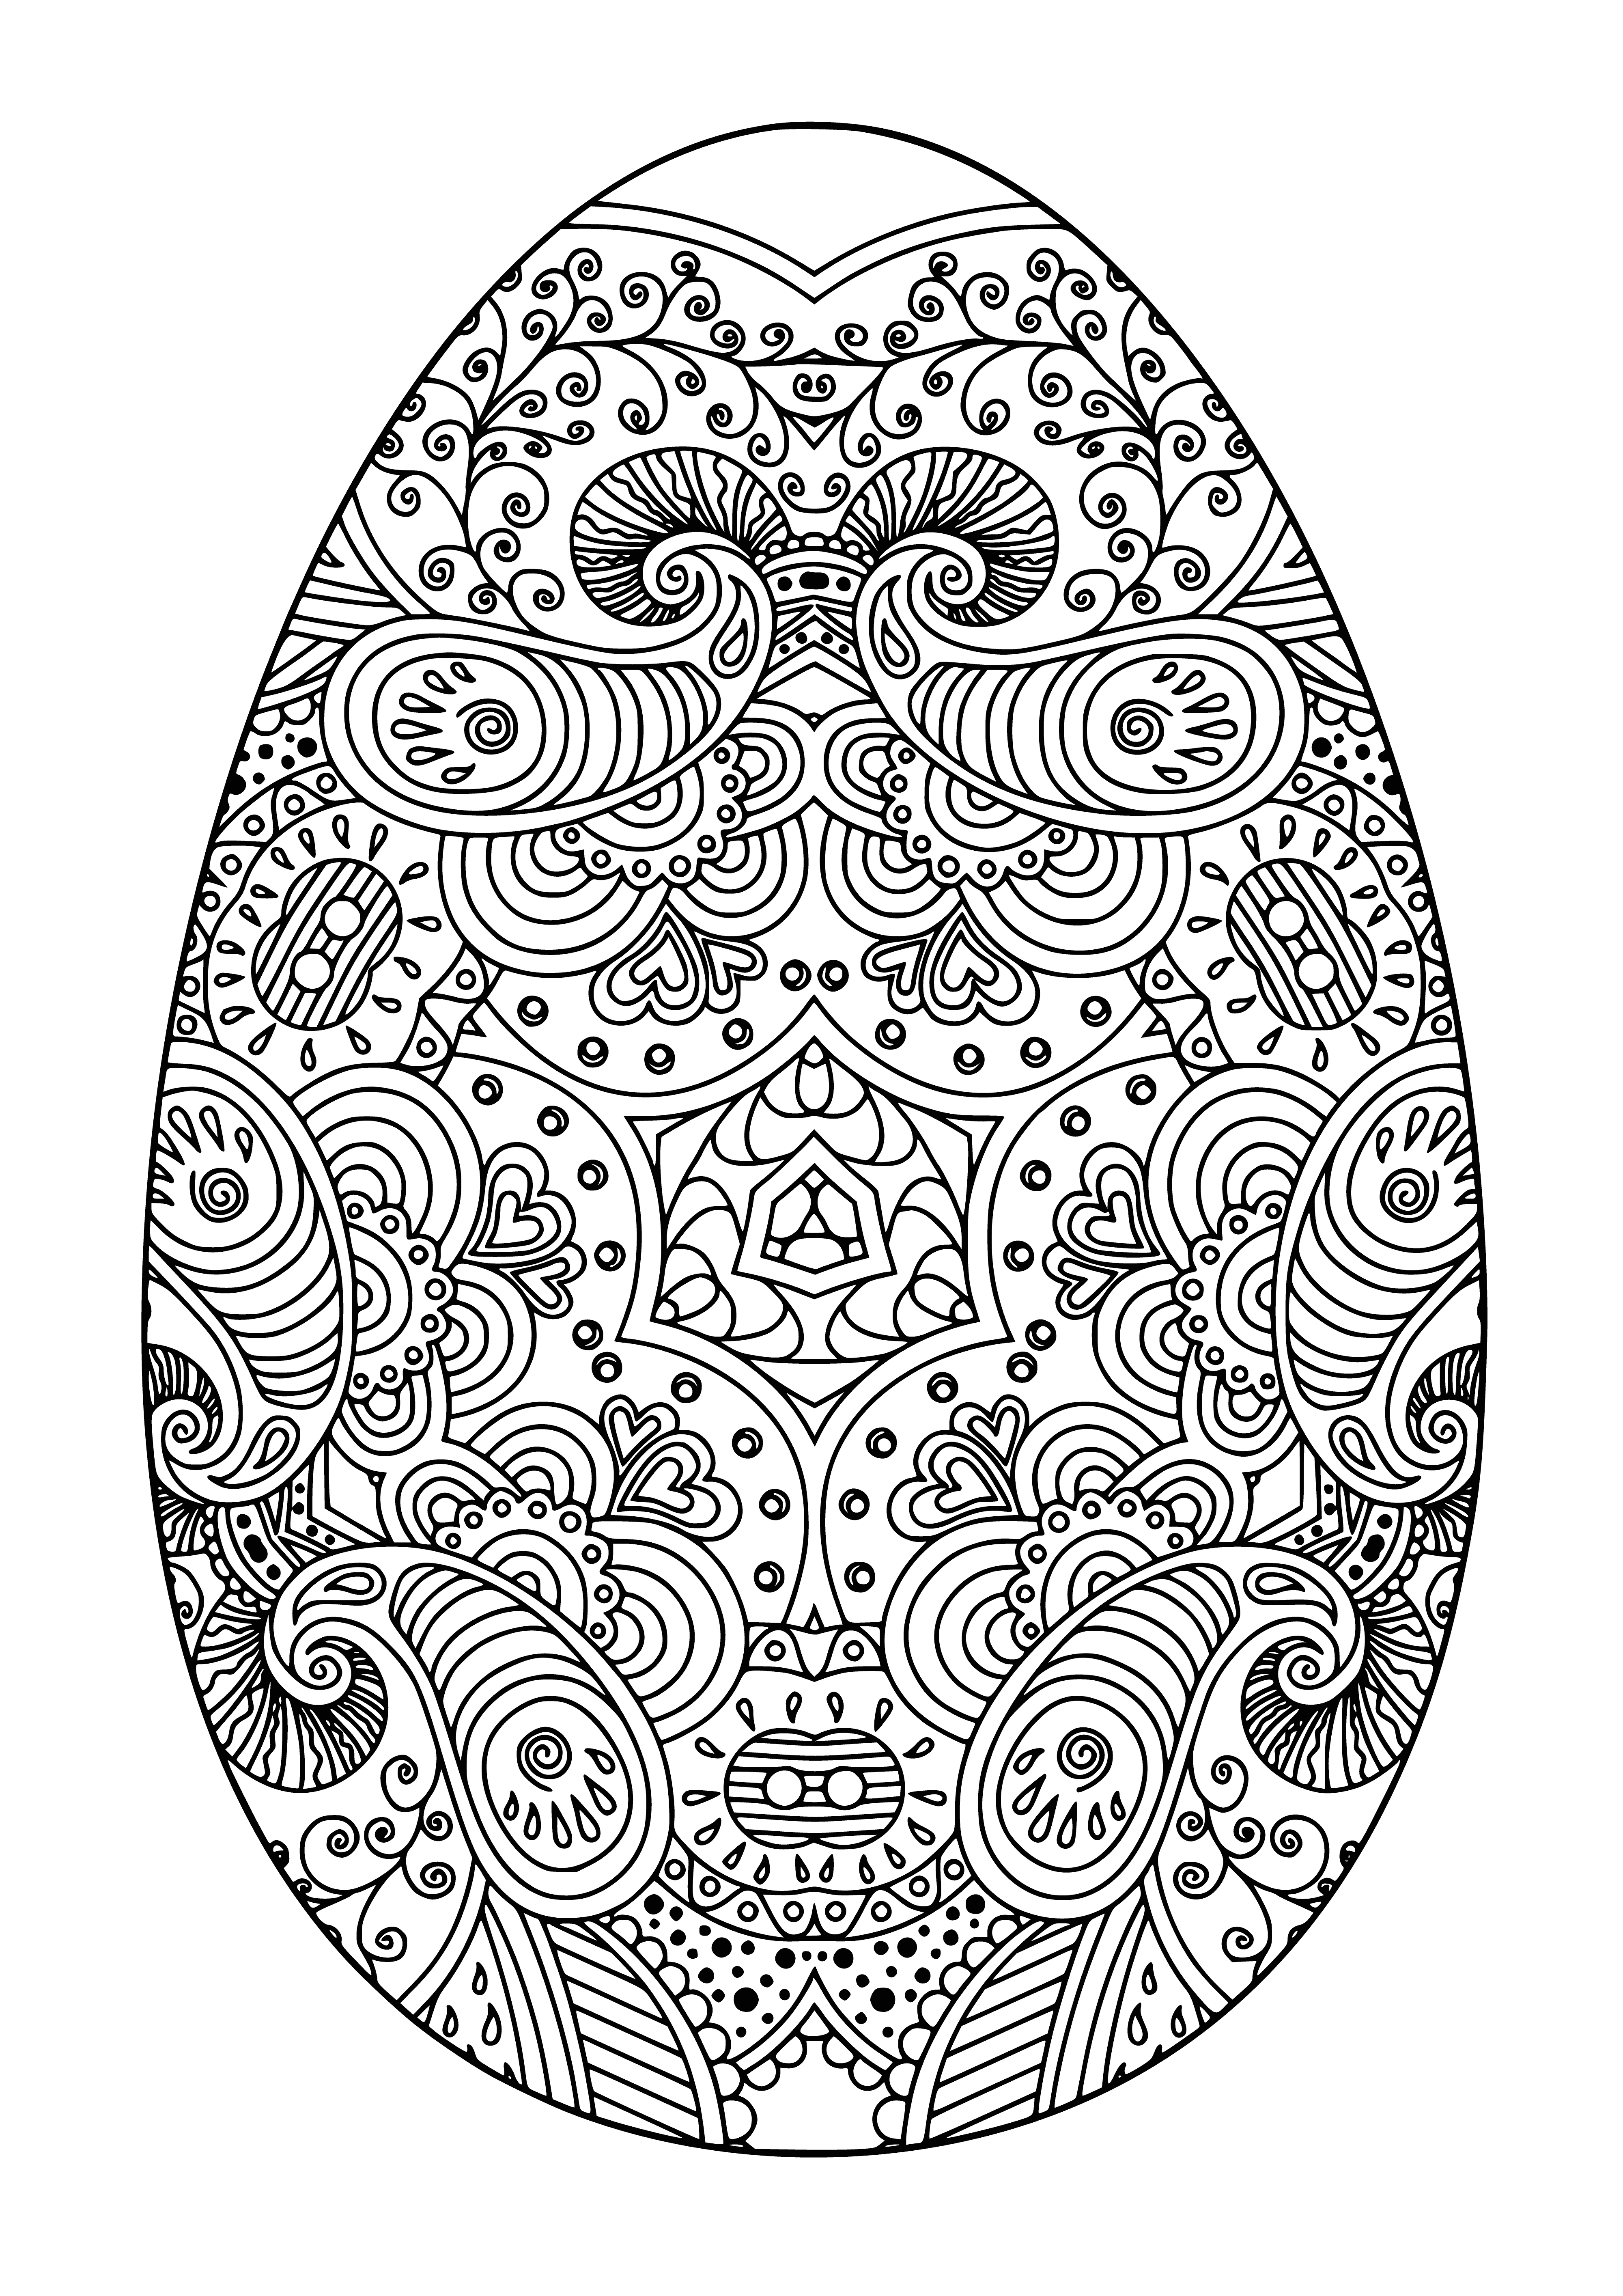 coloring page: Coloring page has large Easter egg with swirls and flowers, plus a bunny holding a basket of eggs. #EasterFun